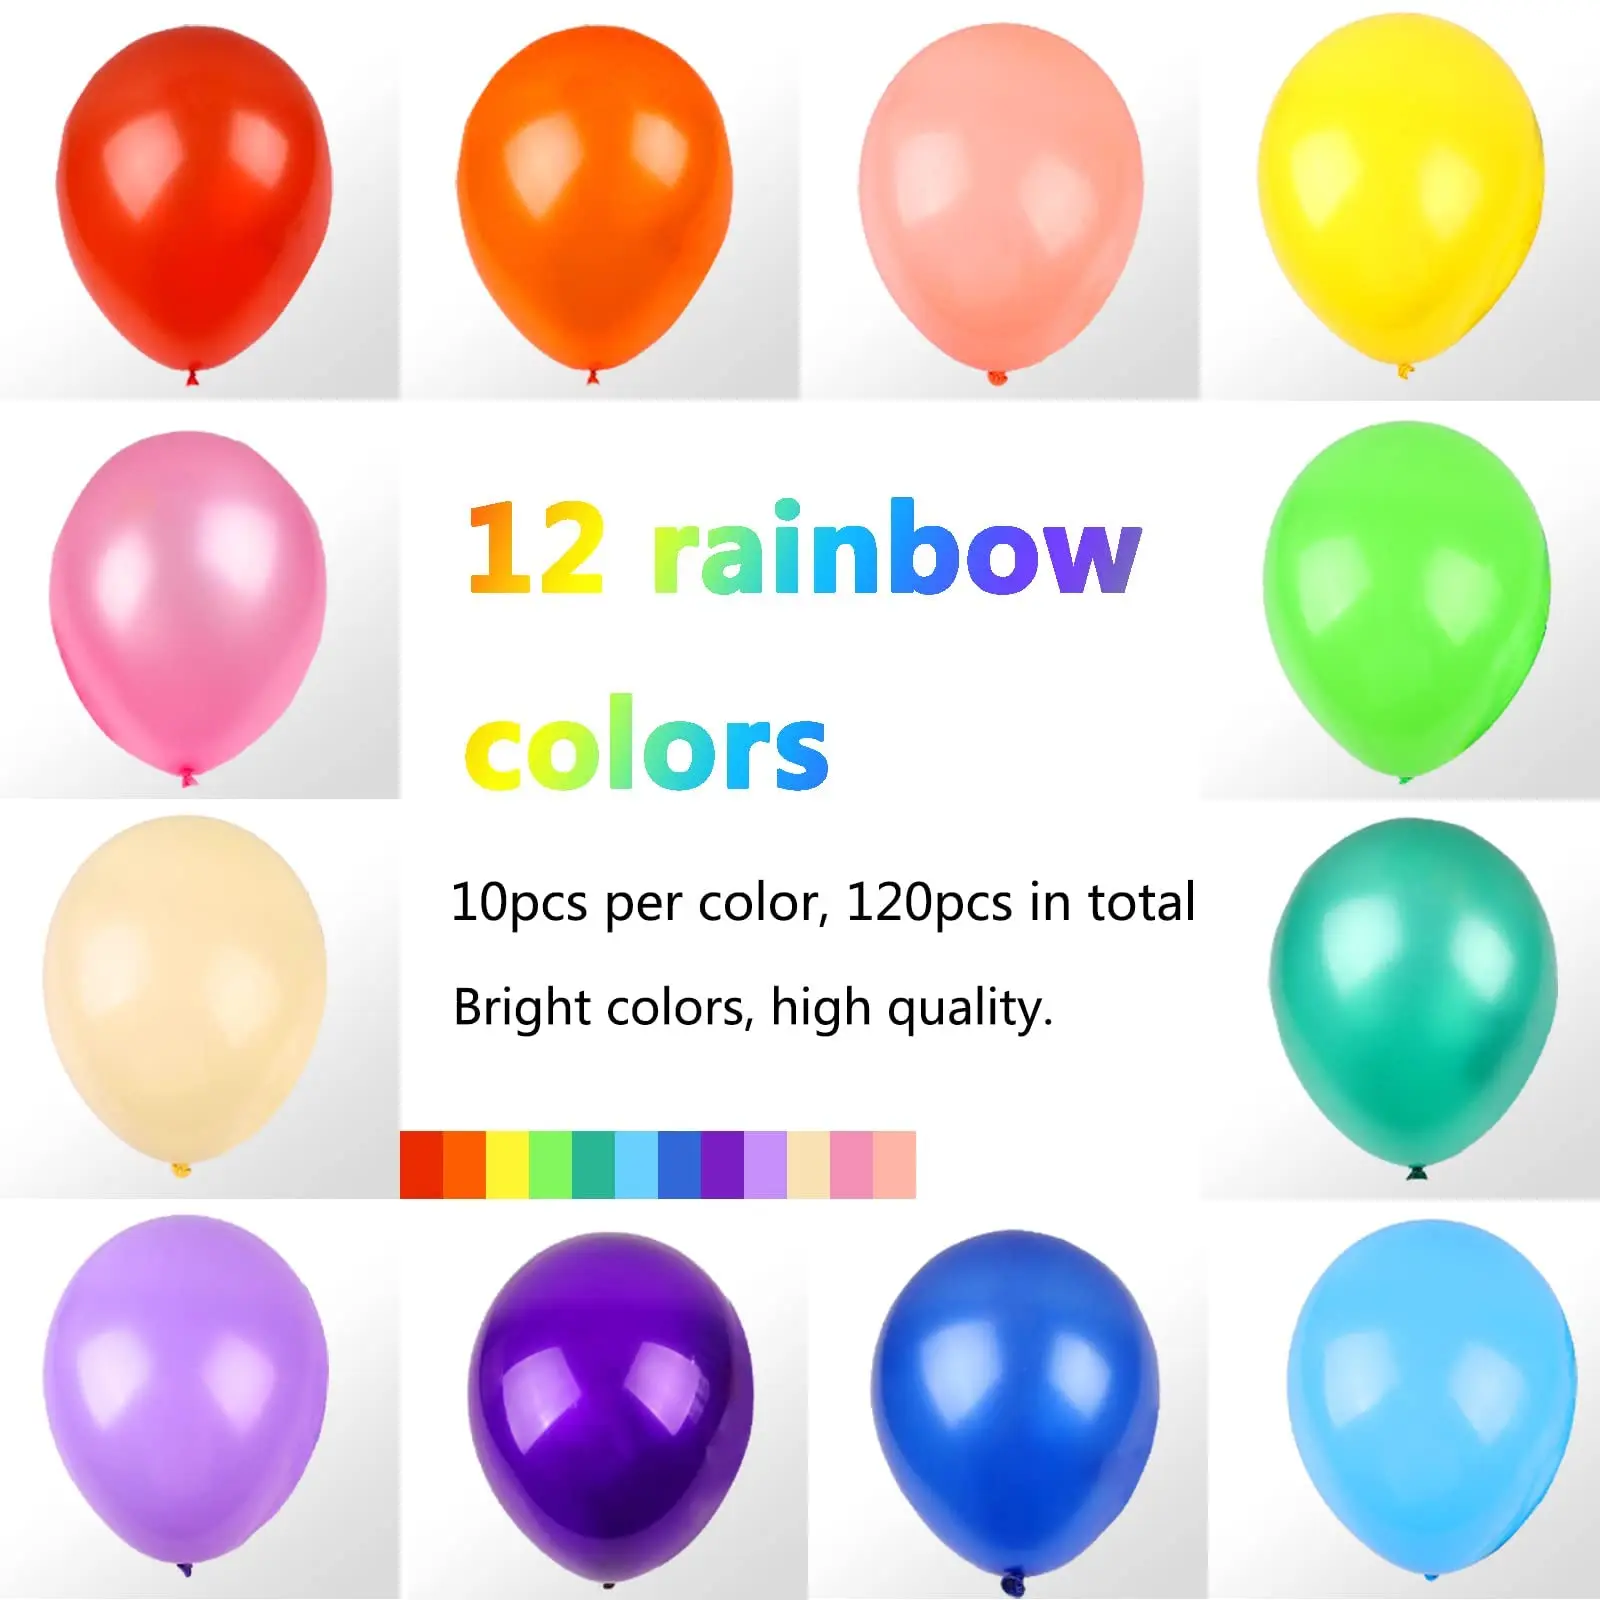 120pcs Balloon Set 12 Inch Chrome Wholesale Inflatable Pualatex Decorations Party Balloons For Bride Wedding Birthday